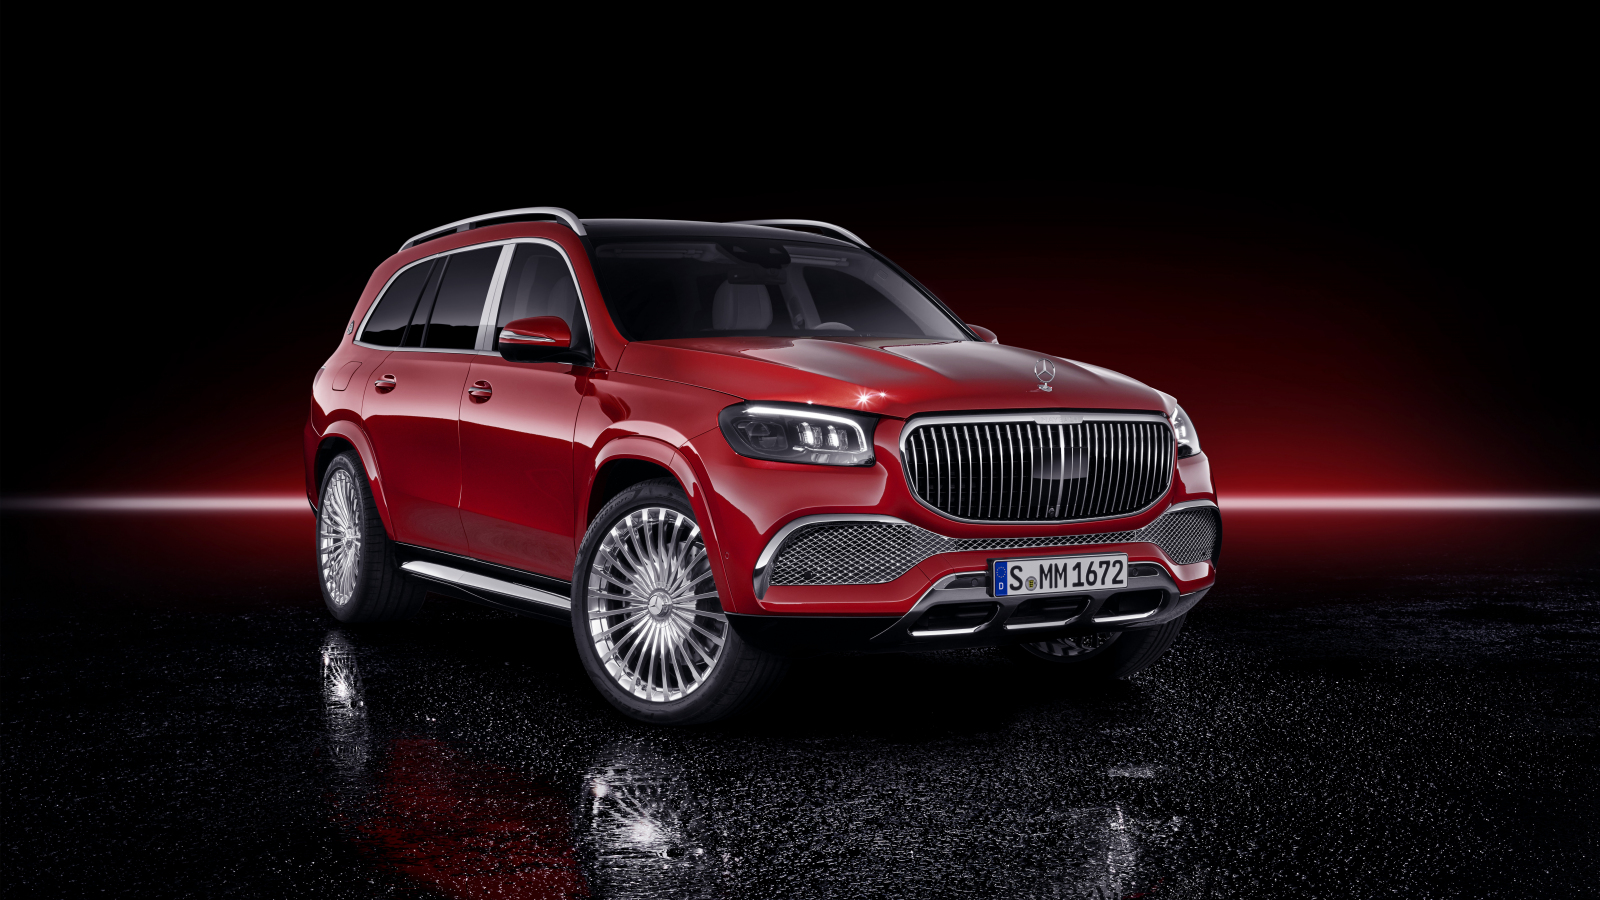 Download Luxurious Suv, Mercedes Maybach Gls 600 1600x900 Wallpaper, 16:9 Widescreen 1600x900 HD Image, Background, 23472